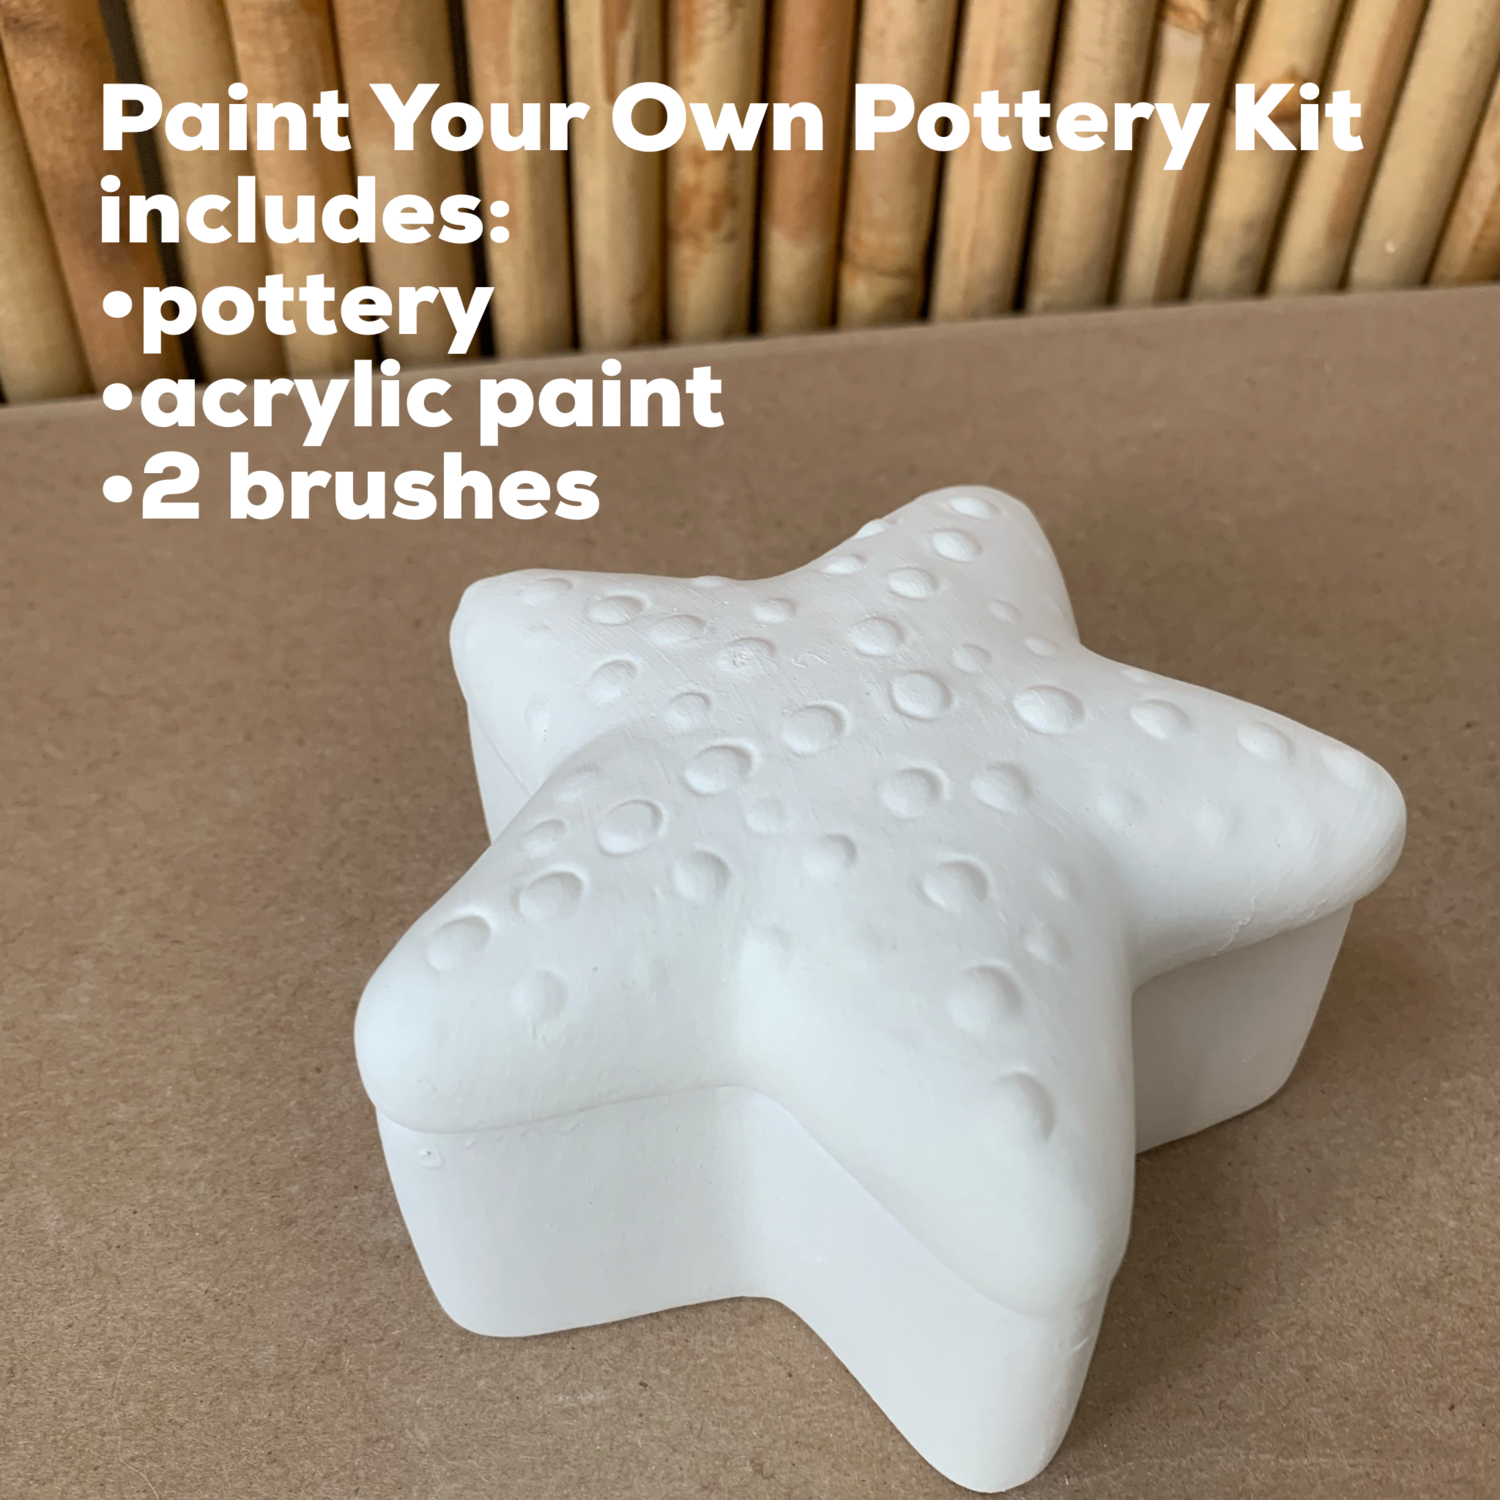 NO FIRE Paint Your Own Pottery Kit -
Ceramic Starfish Box Acrylic Painting Kit